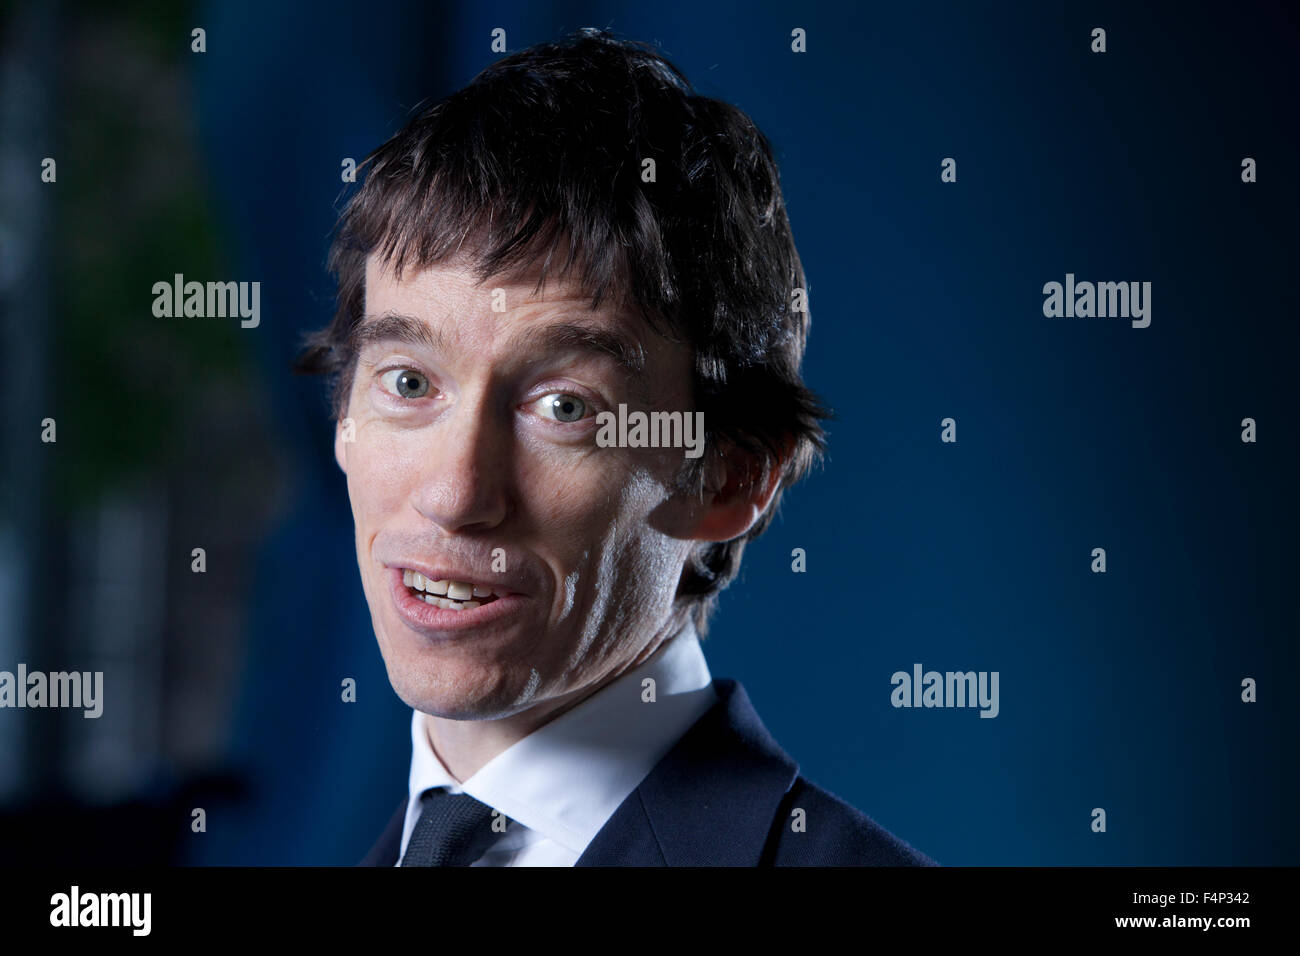 Rory Stewart, British academic, author and Conservative politician, at the Edinburgh International Book Festival 2015. Stock Photo